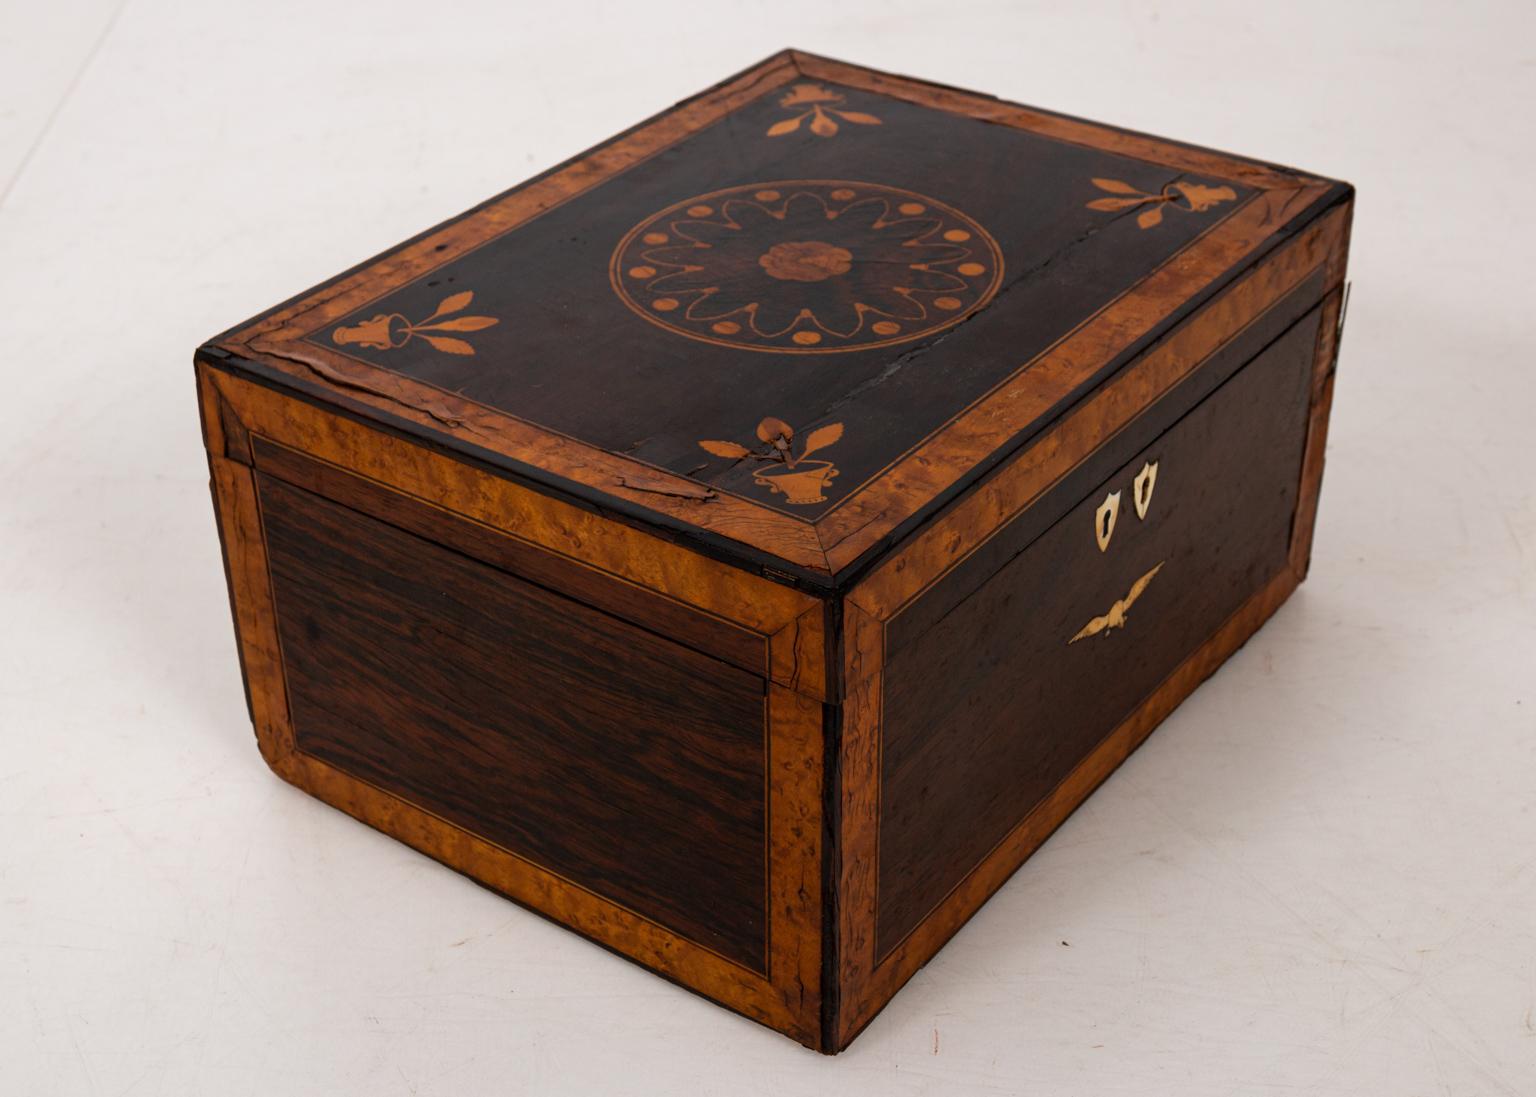 Rosewood jewelry or sewing box with satinwood, bird's-eye maple, and bone inlay, circa 1830s. The veneered piece features an interior fitted with compass rose inlay. Please note of wear consistent with age including cracks, minor losses, and